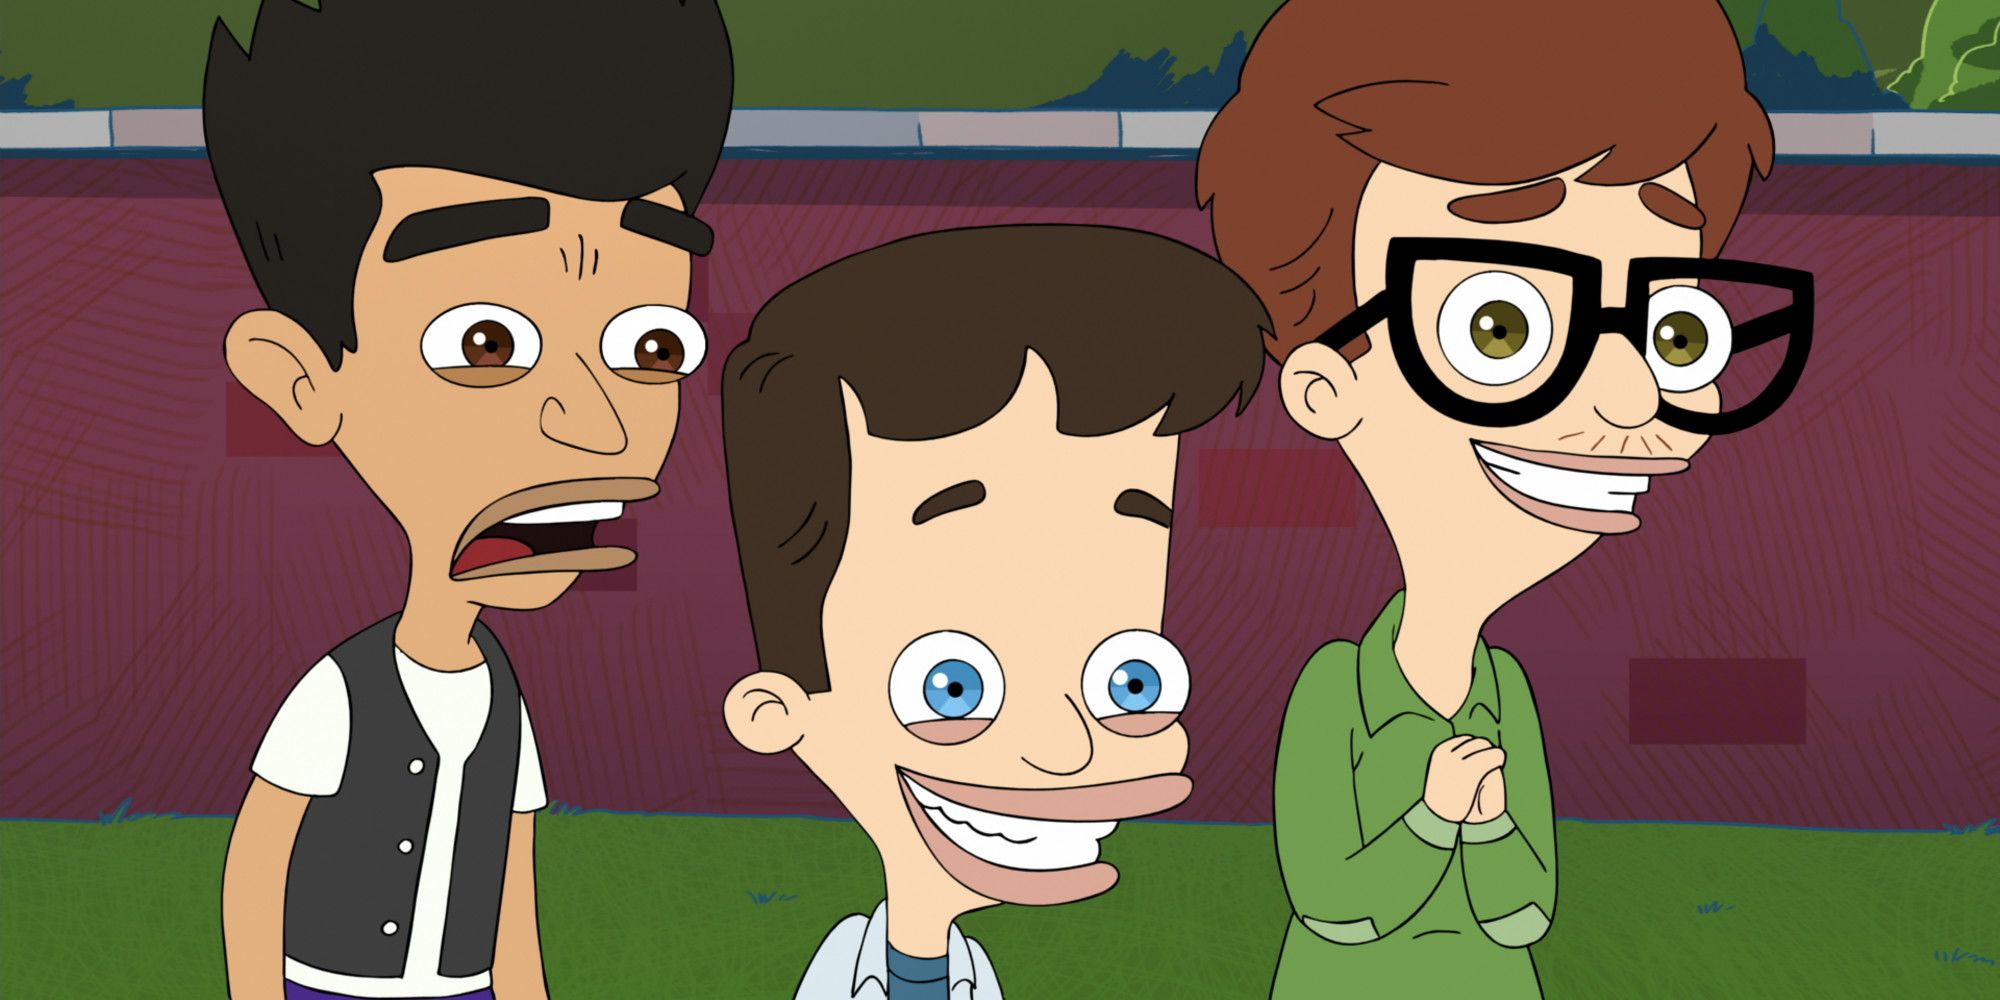 A scene from the Big Mouth Season 2 Trailer